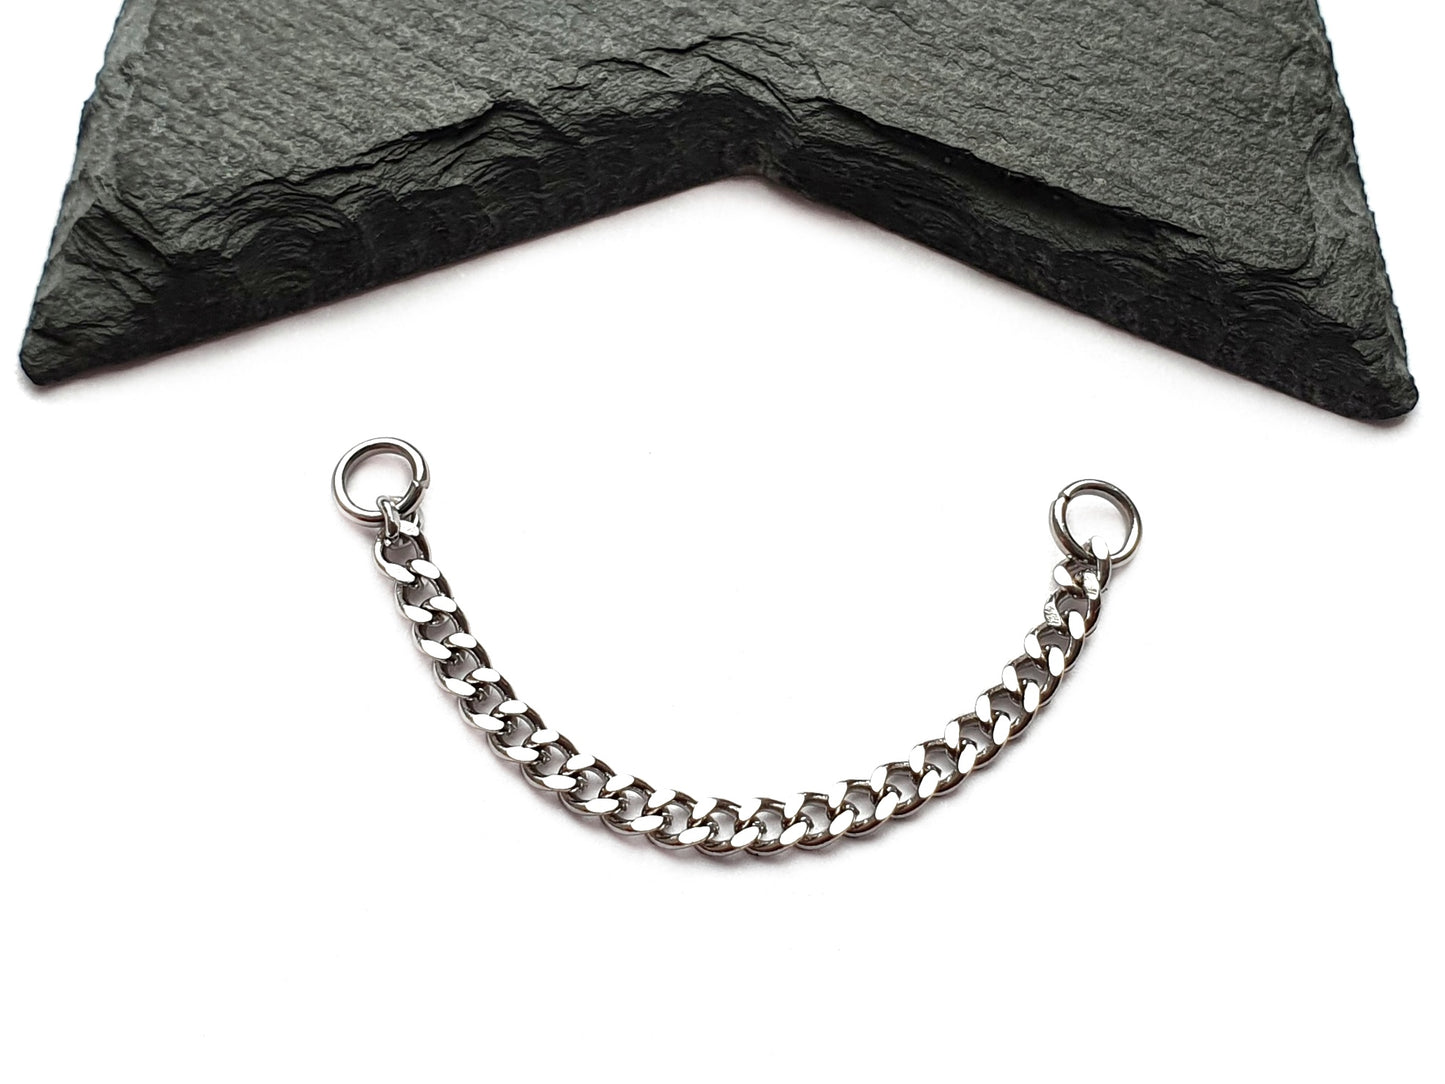 Stainless steel curb chain ear jacket